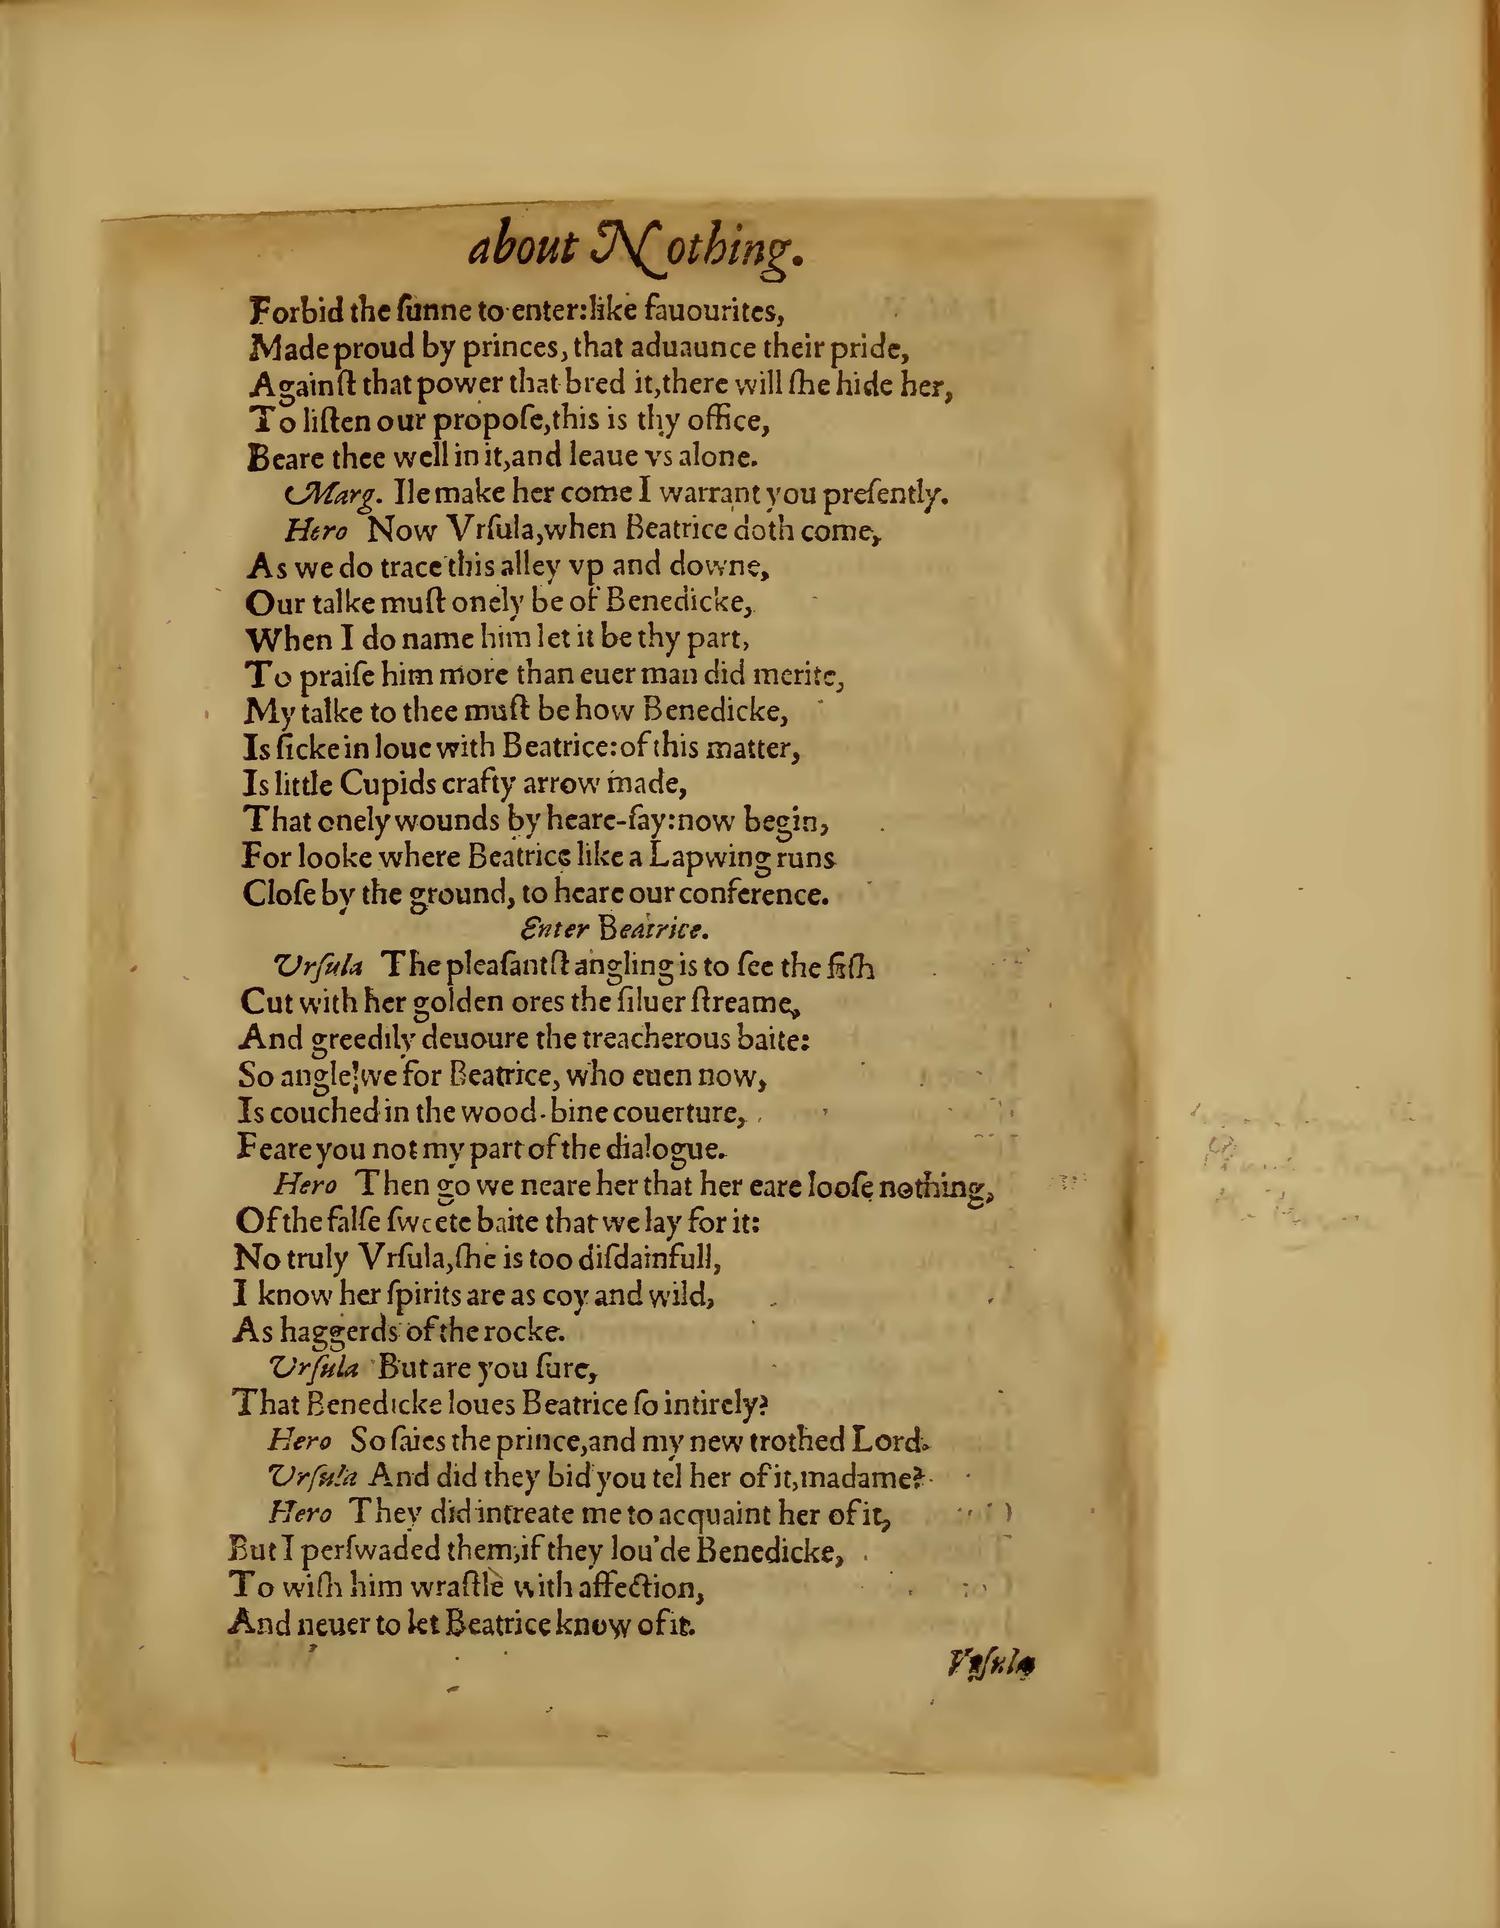 first folio much ado about nothing